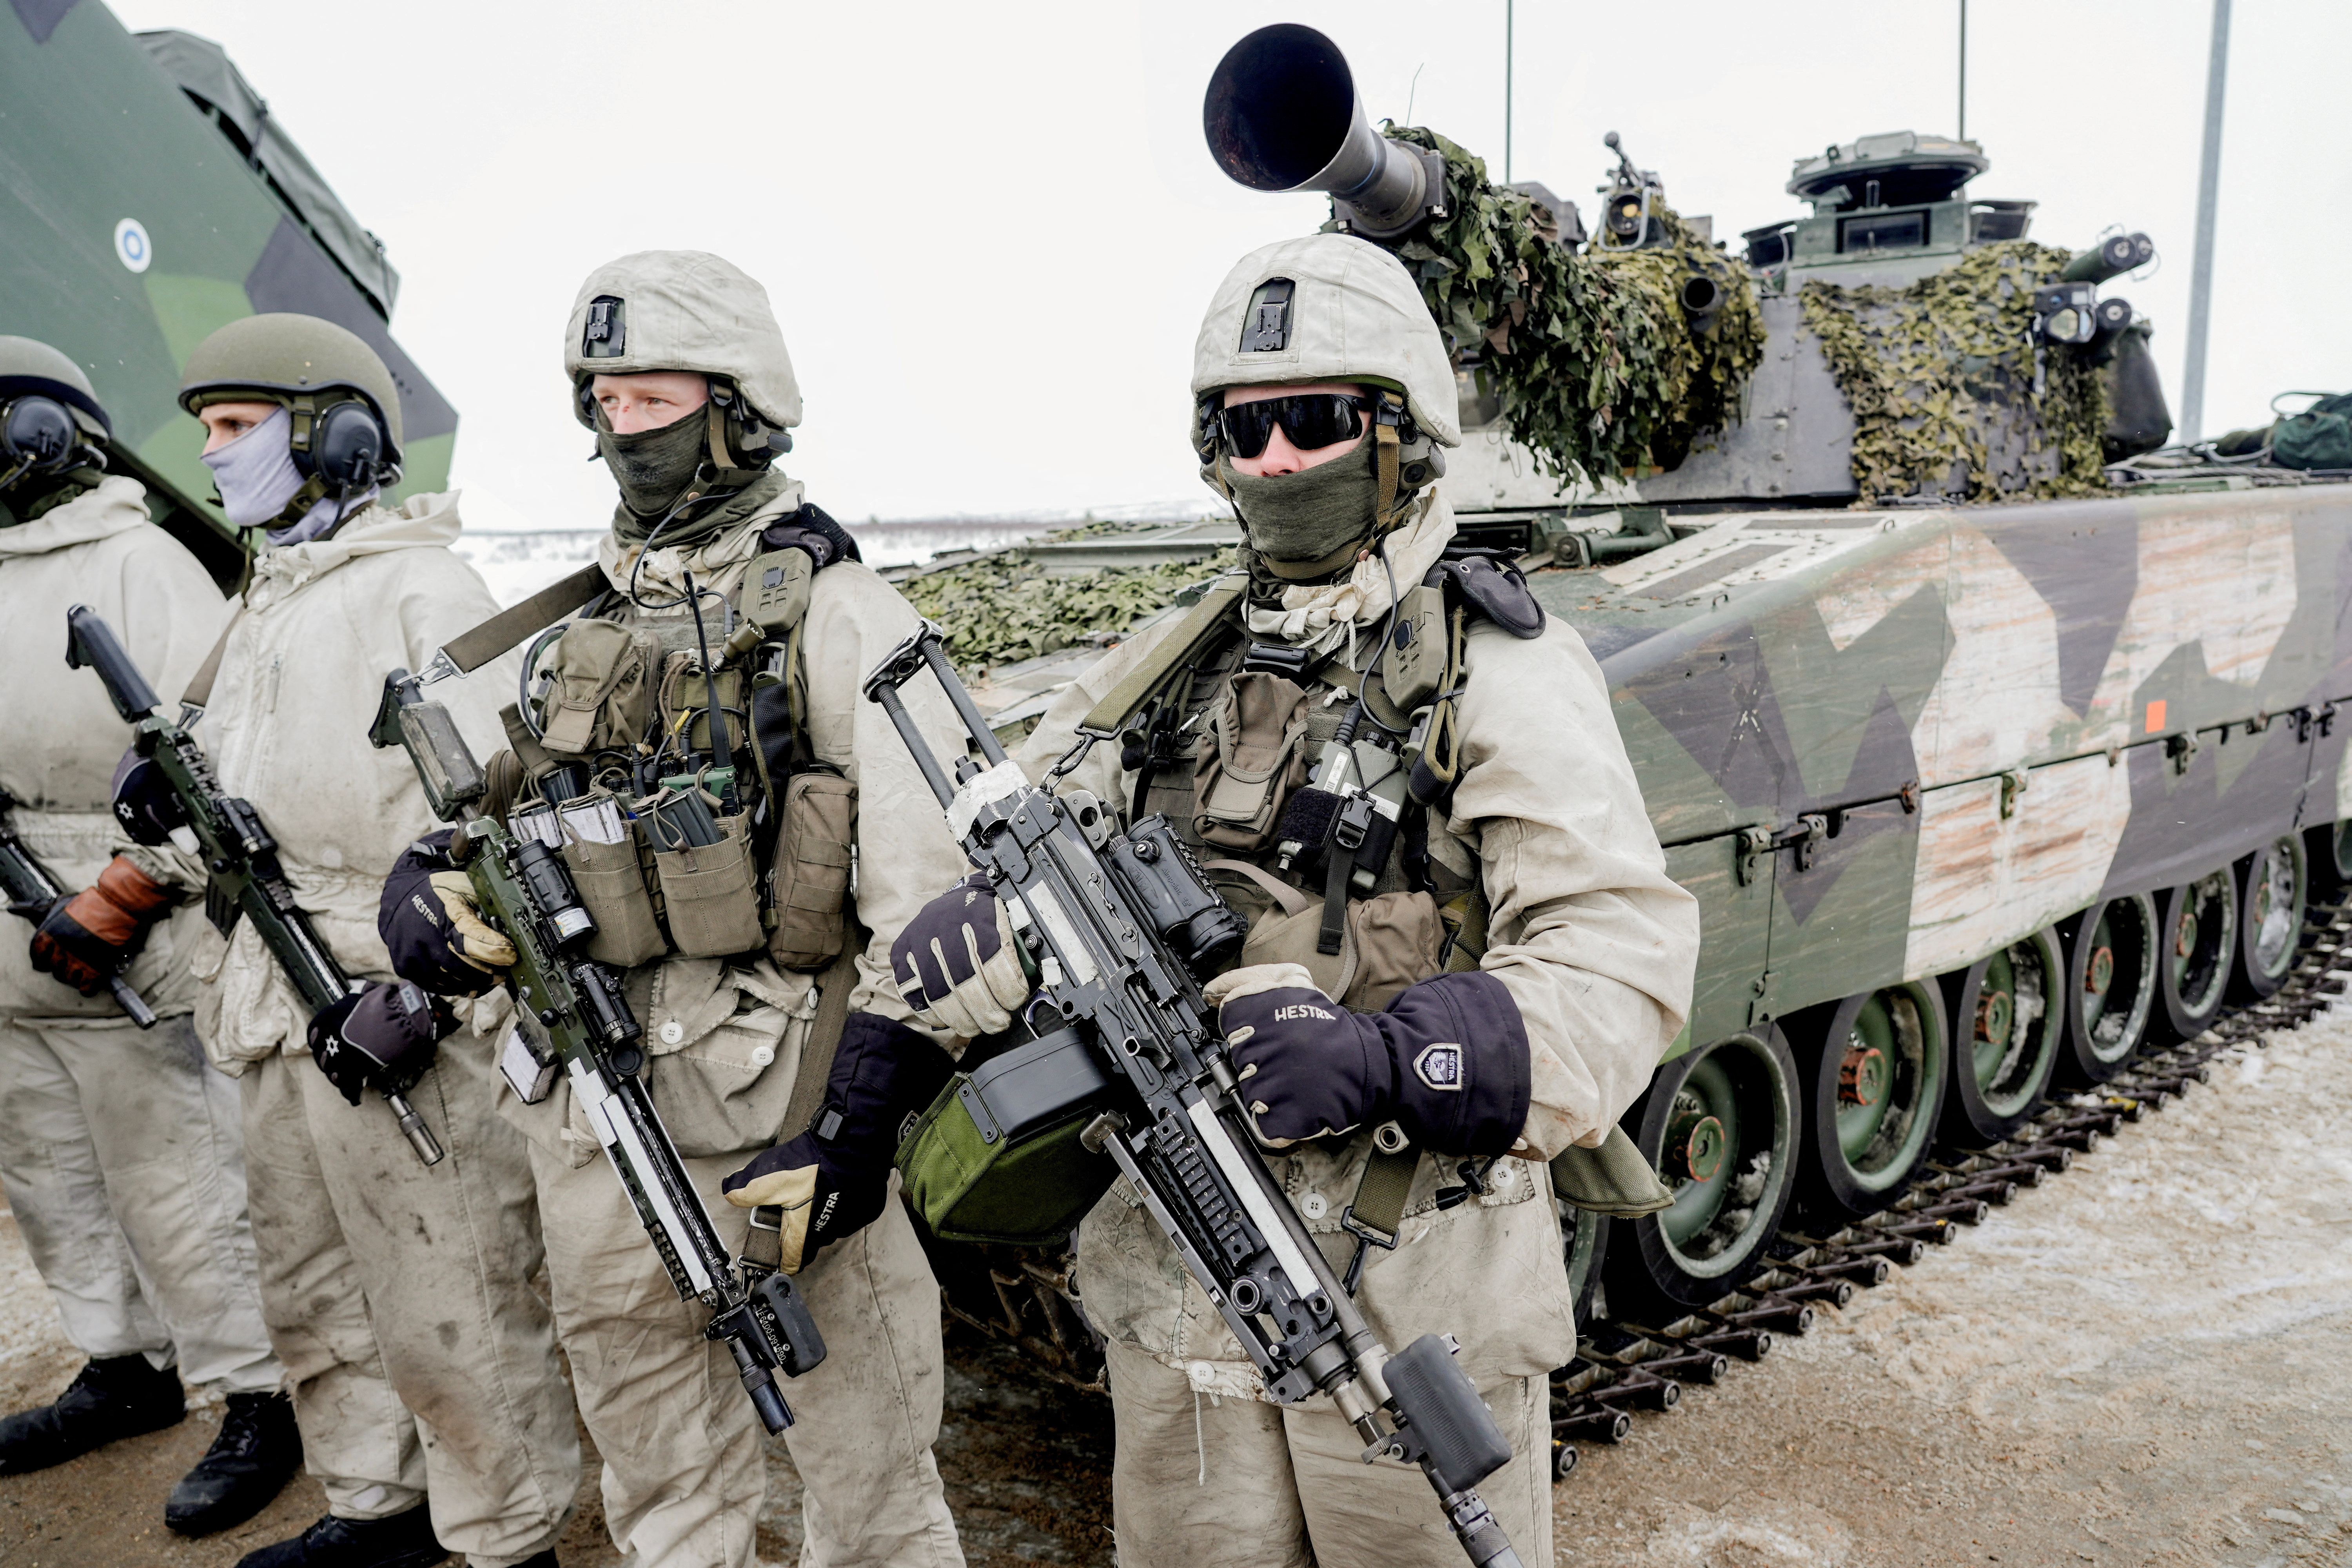 Soldiers stand next to a military vehicle as Norwegian, Swedish and Finnish forces participate in a military exercise, in Kautokeino